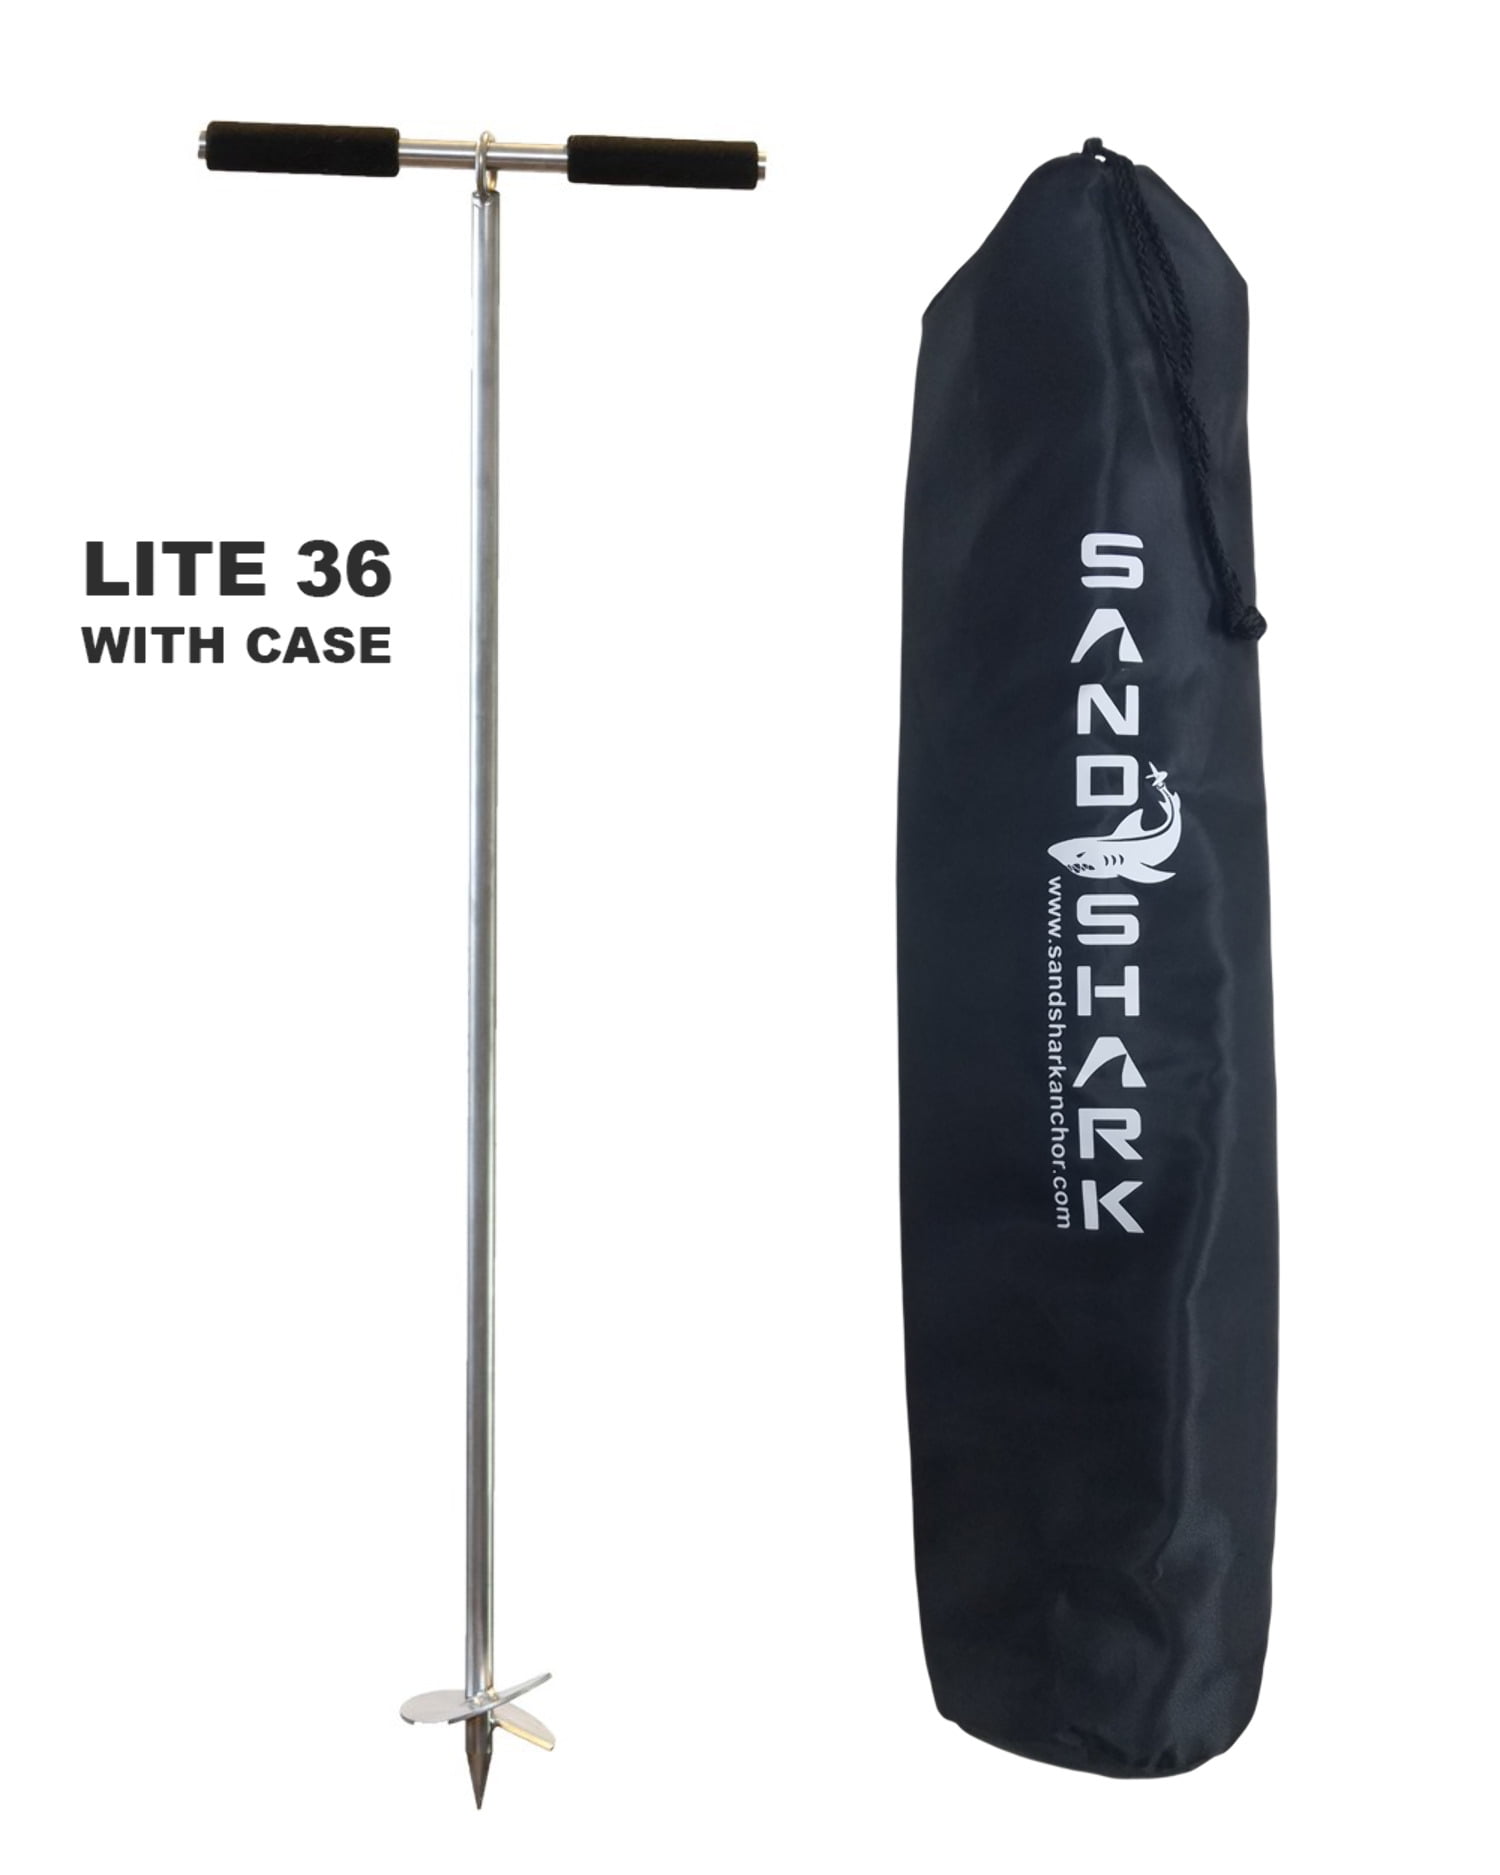 LITE 36 SandShark Boat or Pontoon Sand Anchor for the Beach or Sandbar.  Stainless Steel with Removable Handle 36?.